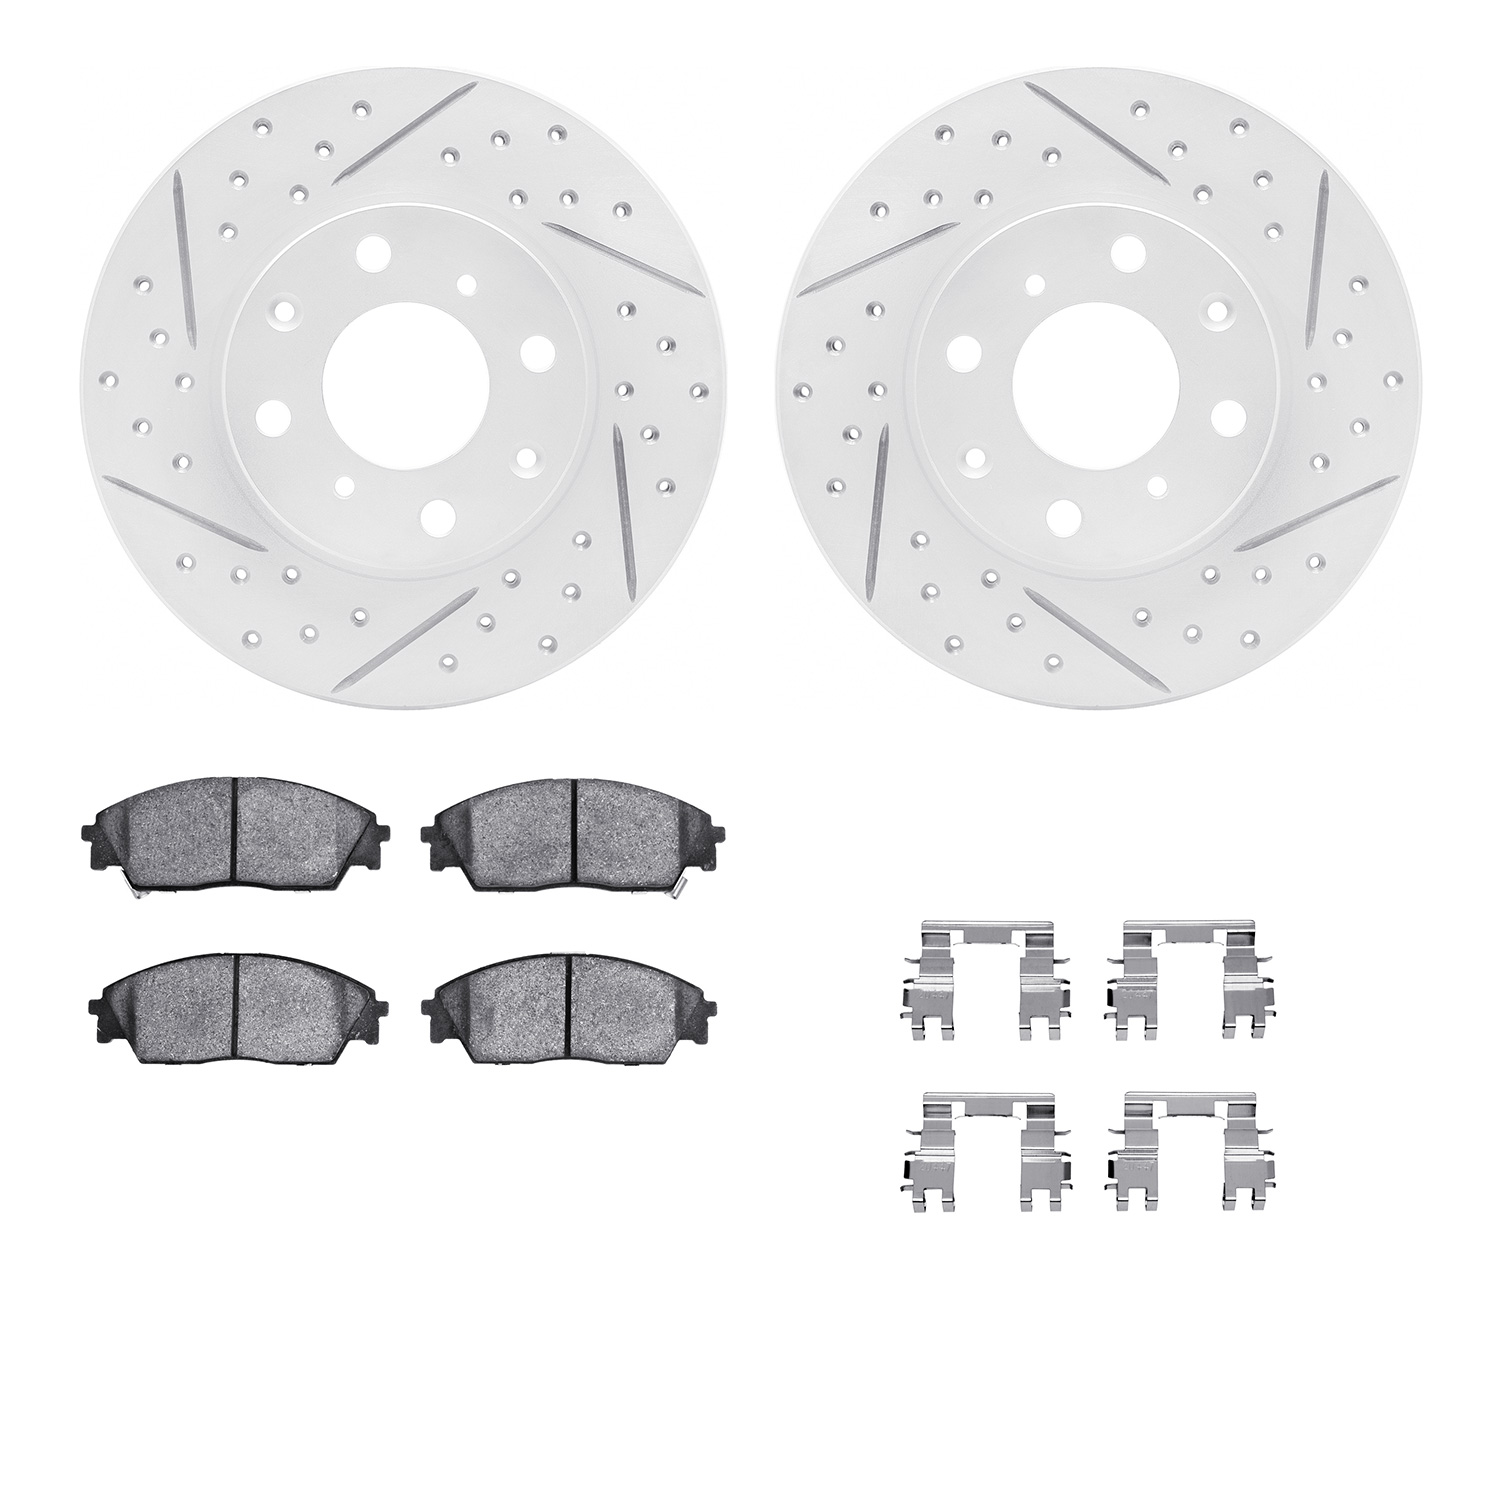 2512-59003 Geoperformance Drilled/Slotted Rotors w/5000 Advanced Brake Pads Kit & Hardware, 1988-1991 Acura/Honda, Position: Fro